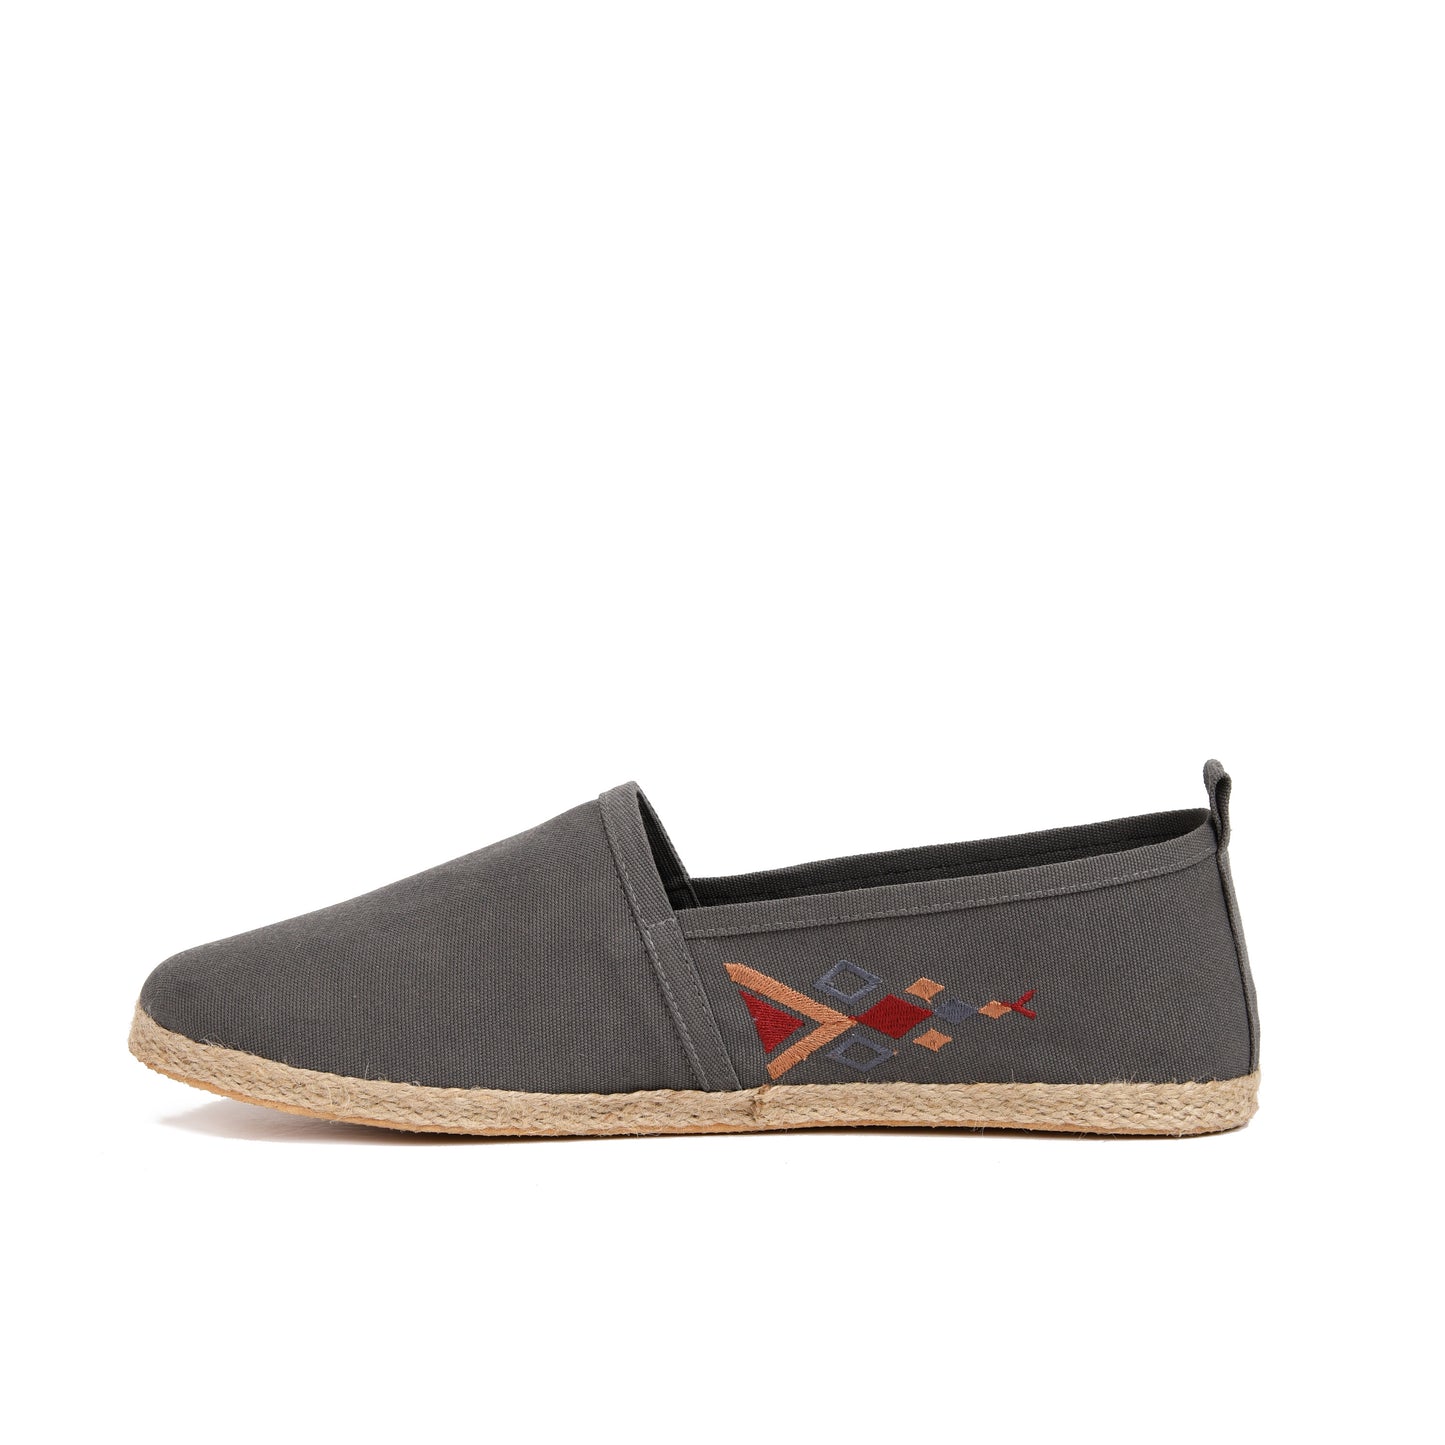 Grey men with colorful embroideries Espadrilles-7000